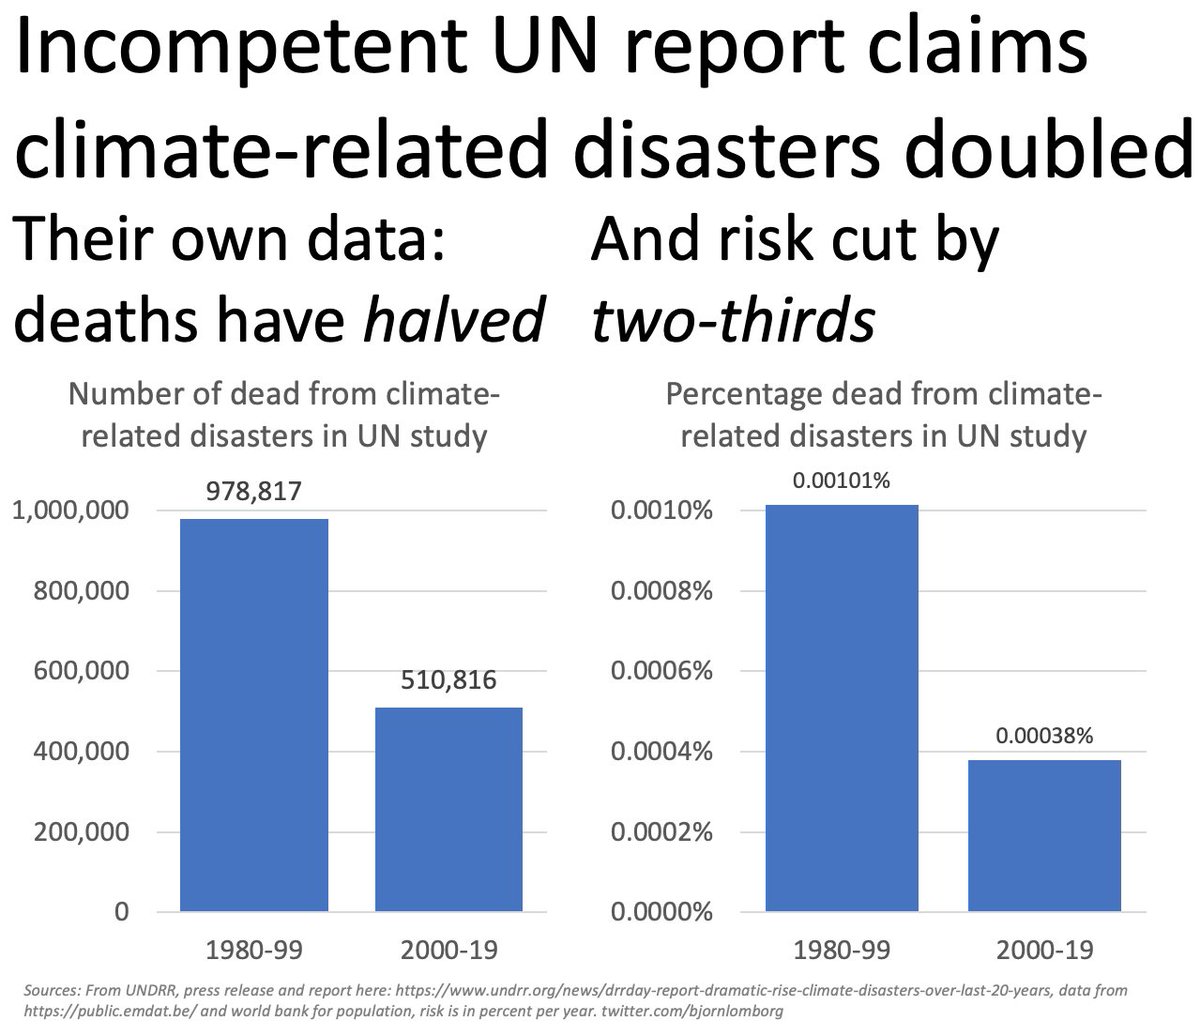 Not only has *actual* death data halvedBecause population increased by 73% over 1980-2019, death risk has dropped by almost two-thirdsReport here:  https://www.undrr.org/news/drrday-report-dramatic-rise-climate-disasters-over-last-20-years